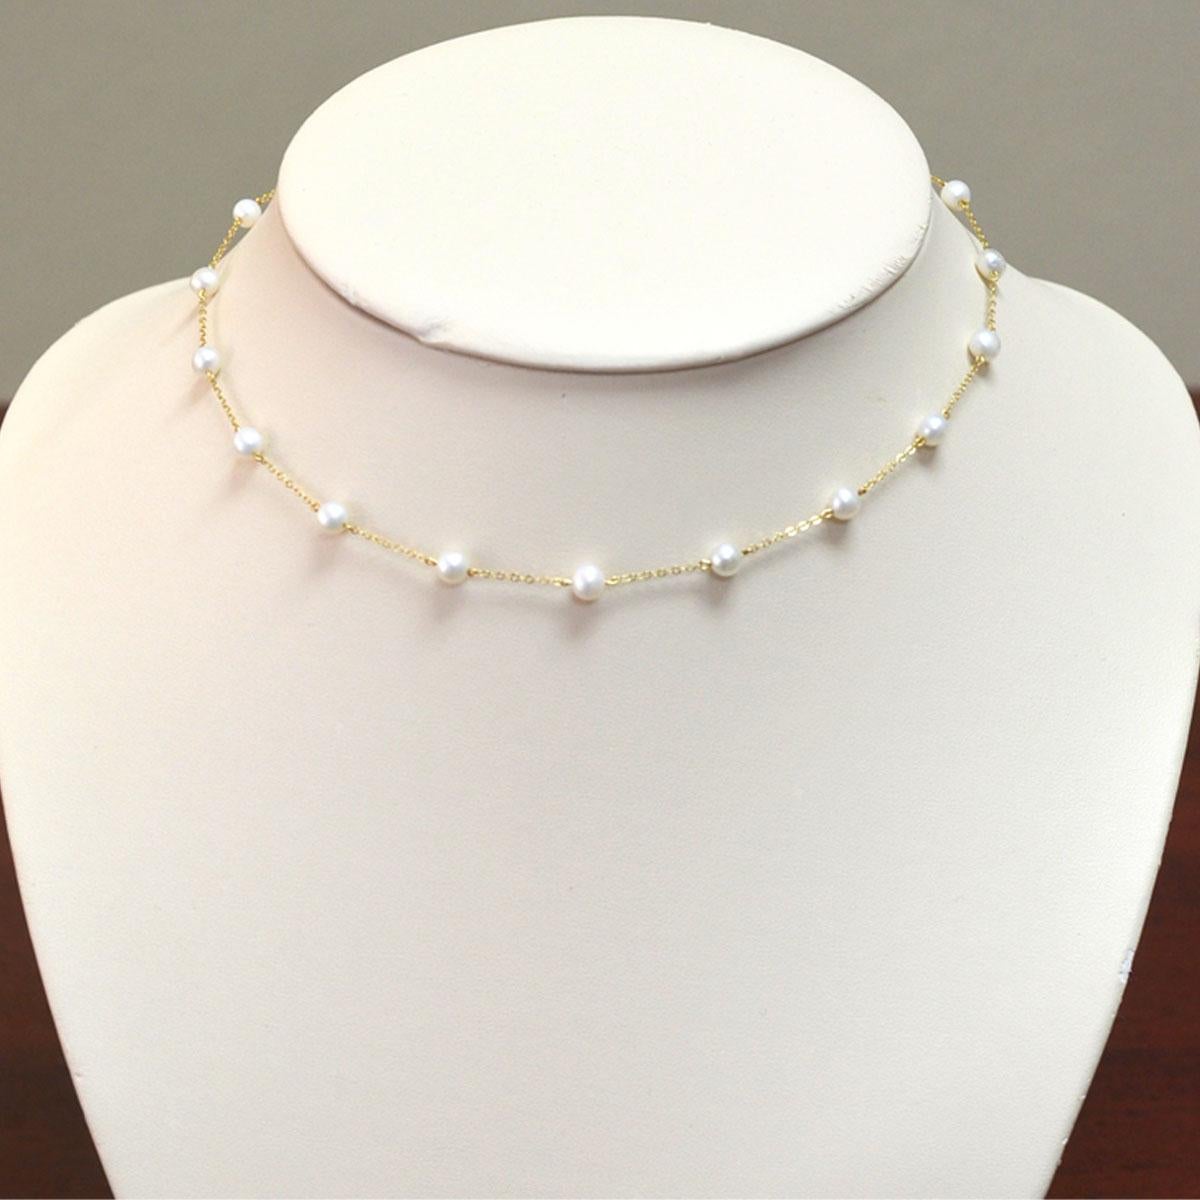 Mikimoto 18 Karat Yellow Gold with White Akoyo Cultured Pearls Station Necklace 5